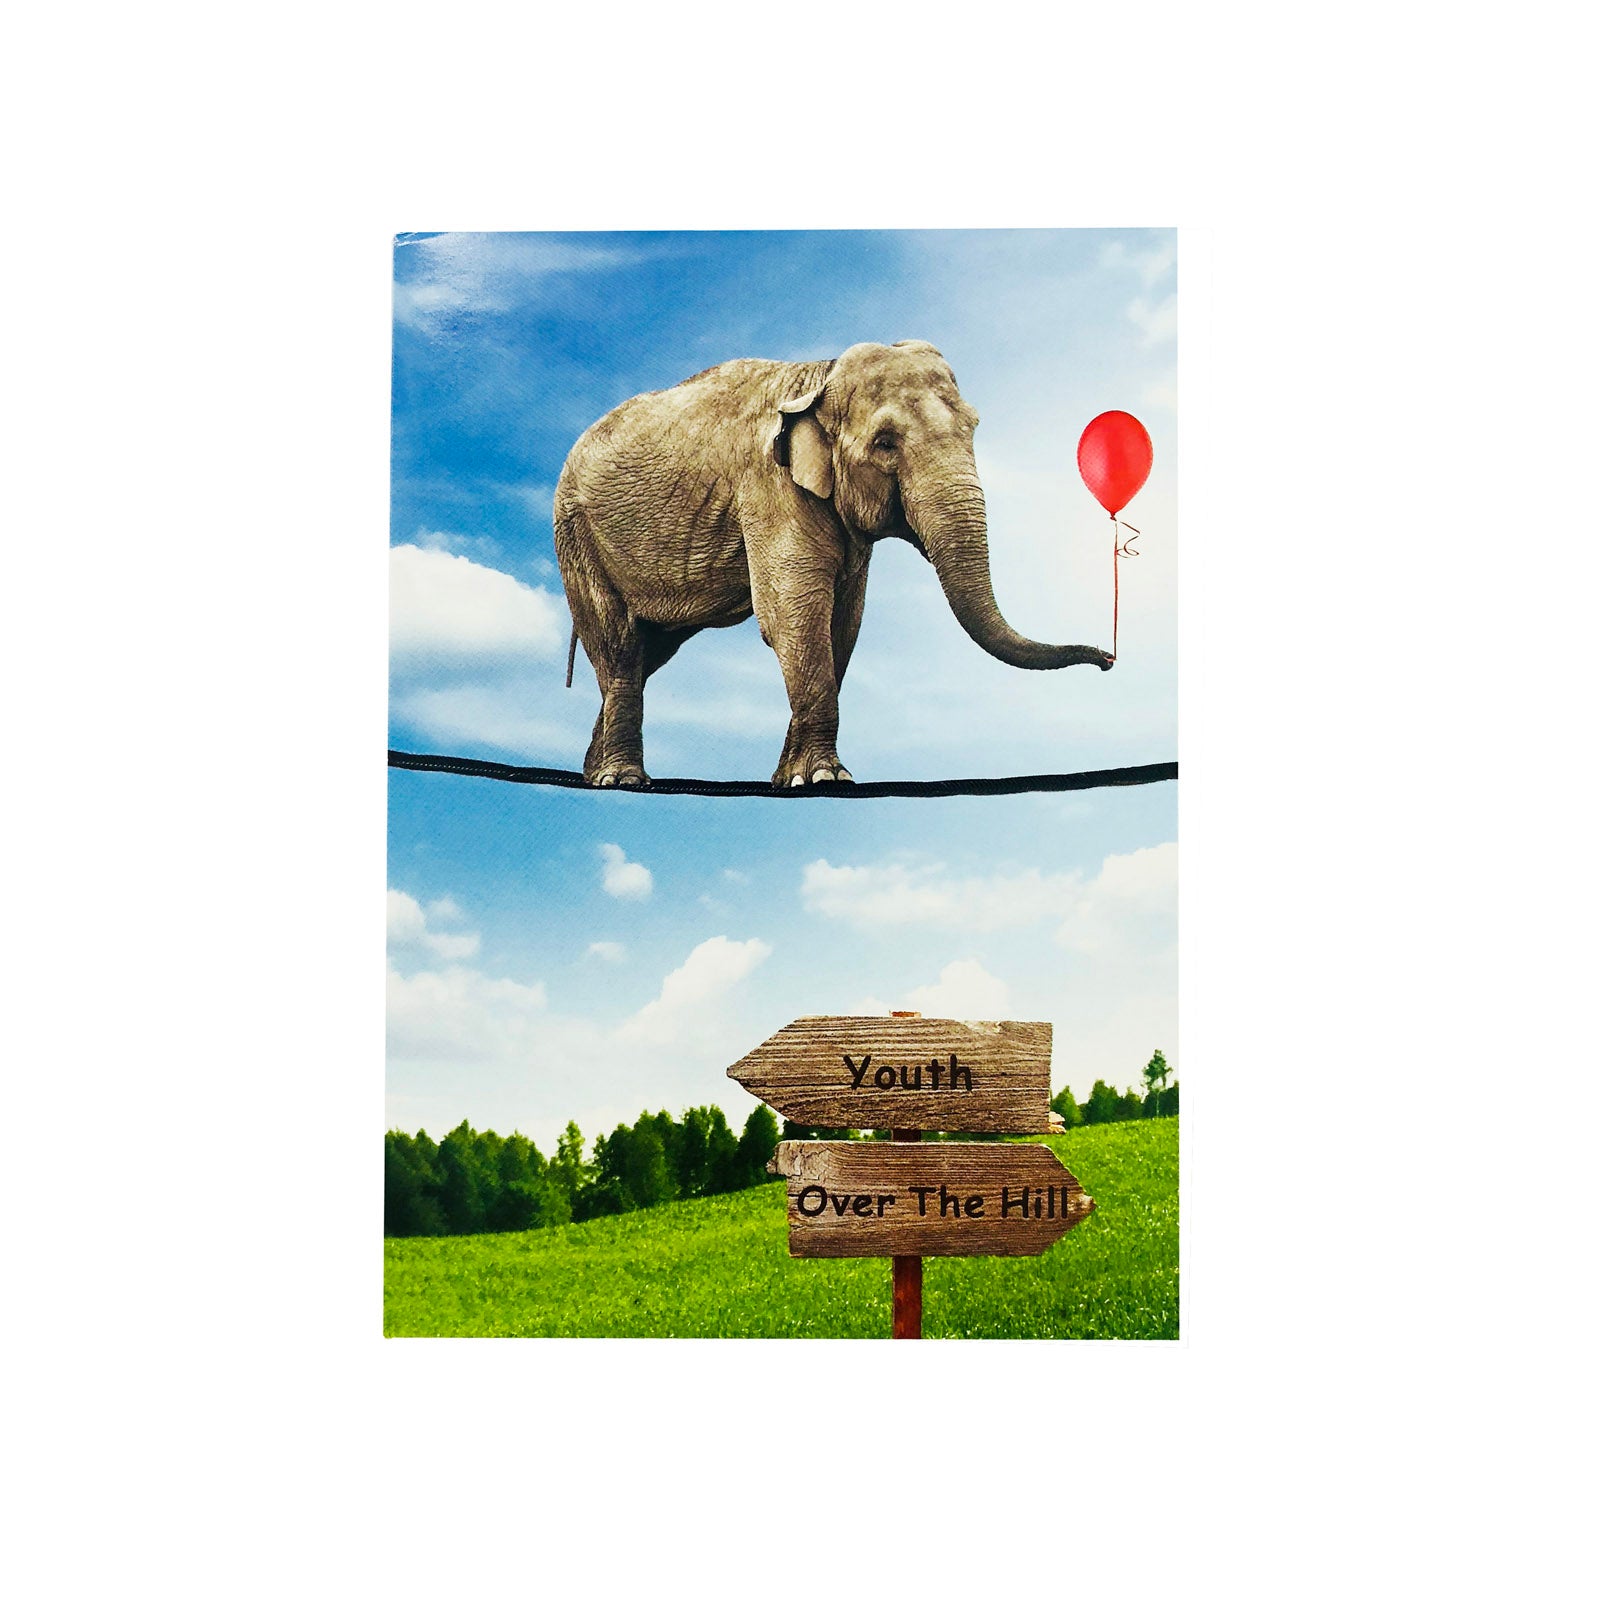 Designer Greetings Birthday Card - Over The Hill - Elephant Tightrope